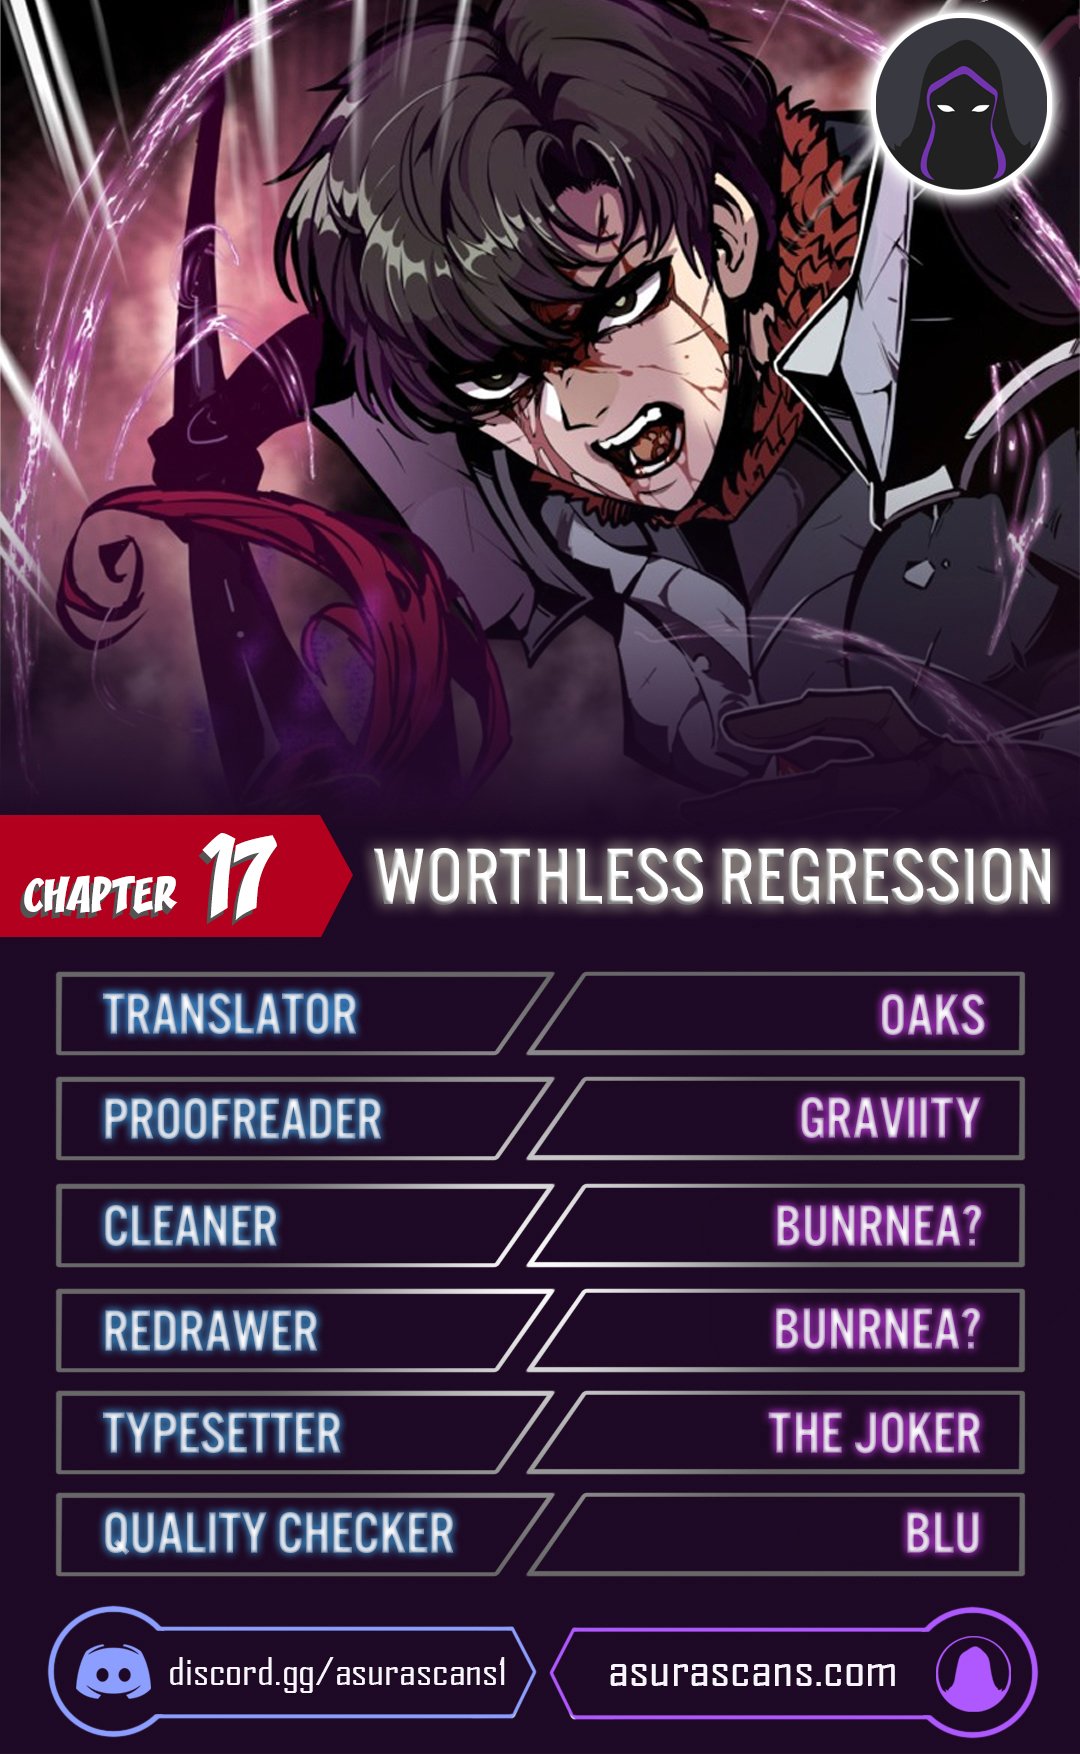 Worthless Regression - Chapter 20455 - Image 1